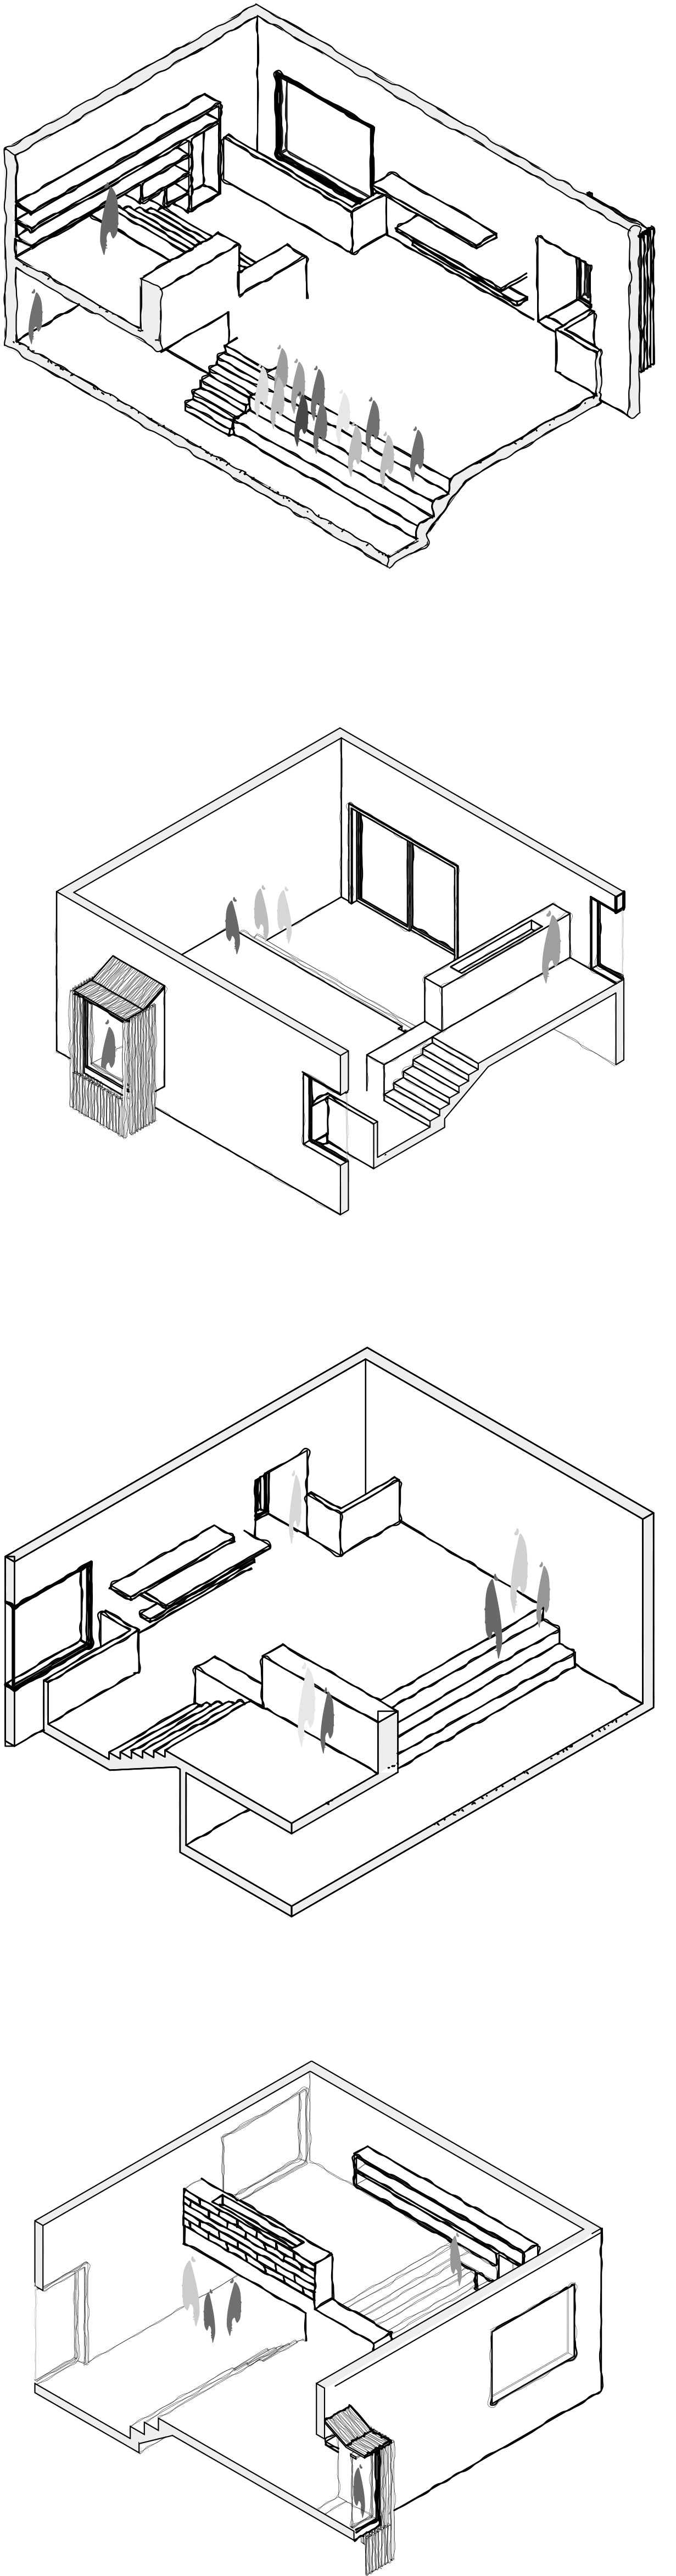 Rotated axonometric section